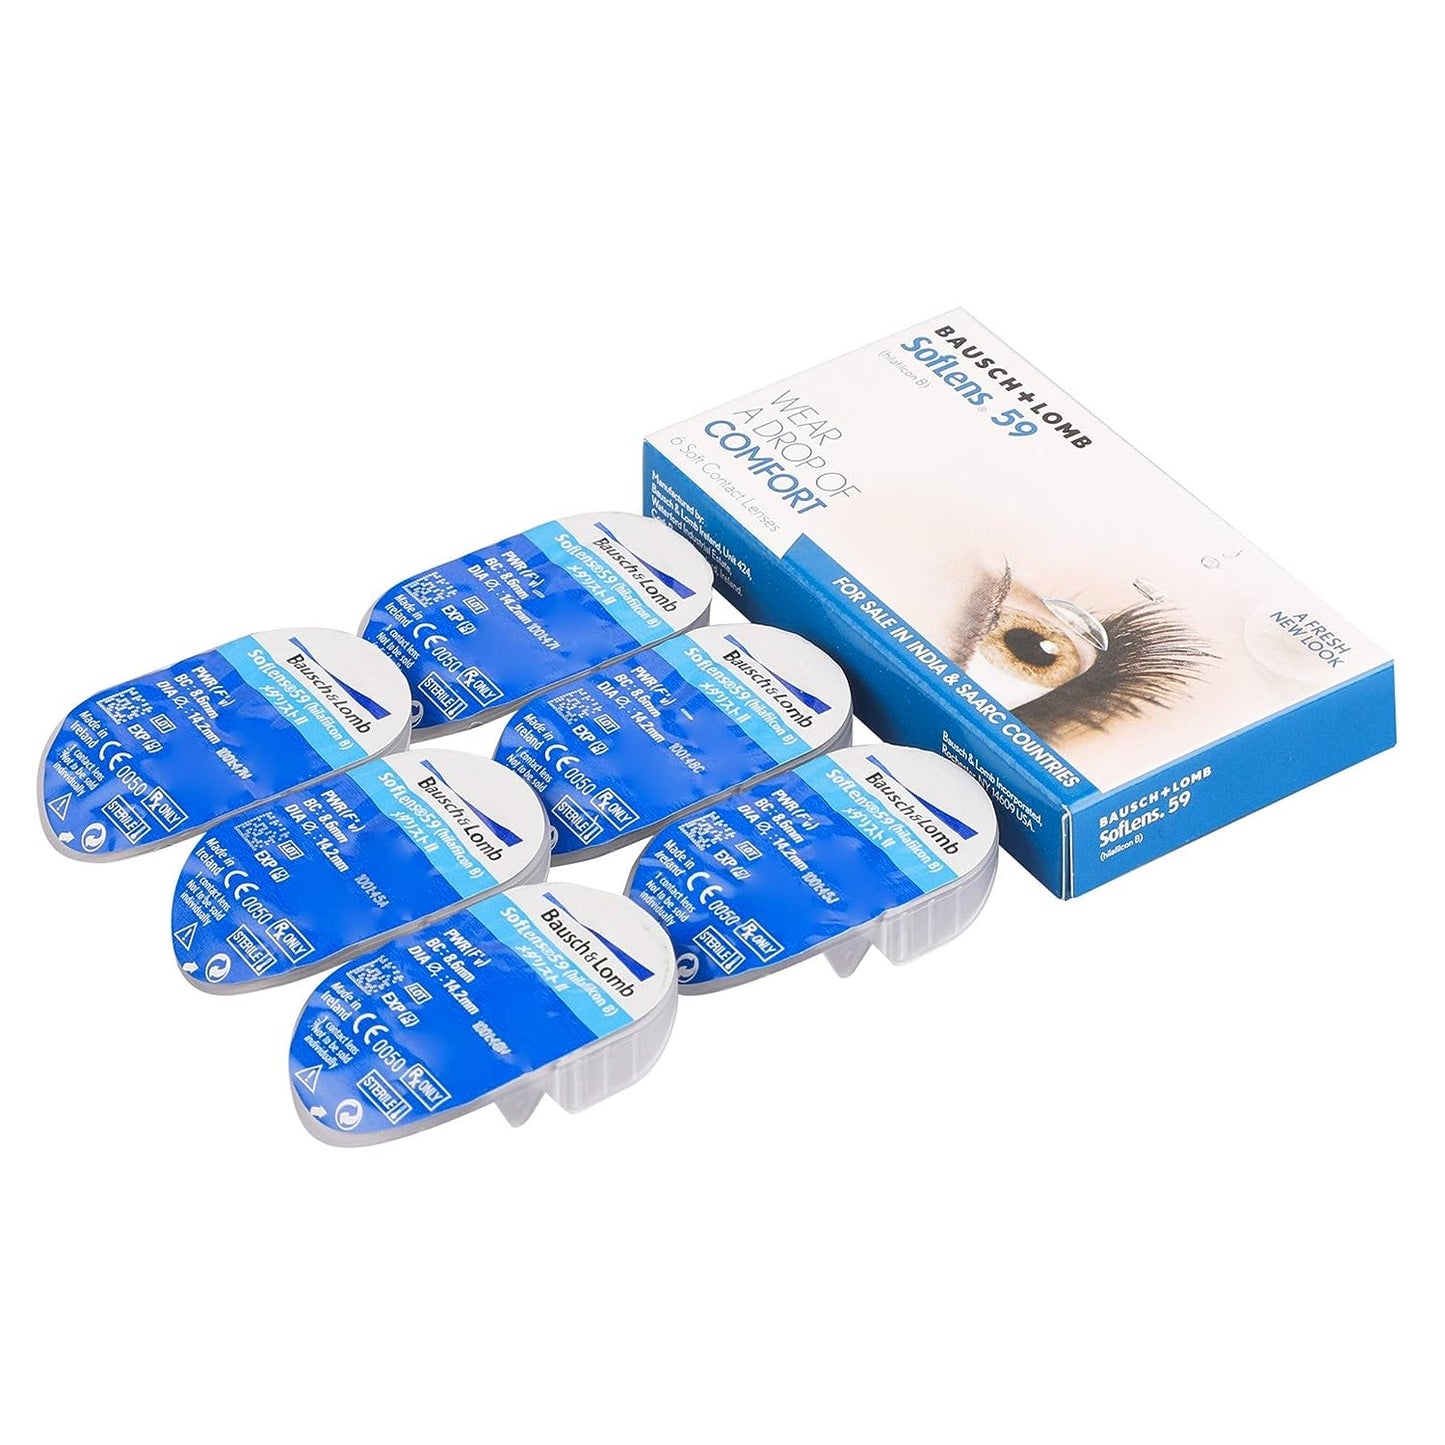 Bausch & Lomb Softlens 59 Monthly Disposable Contact Lens (Clear, 6 Lenses)